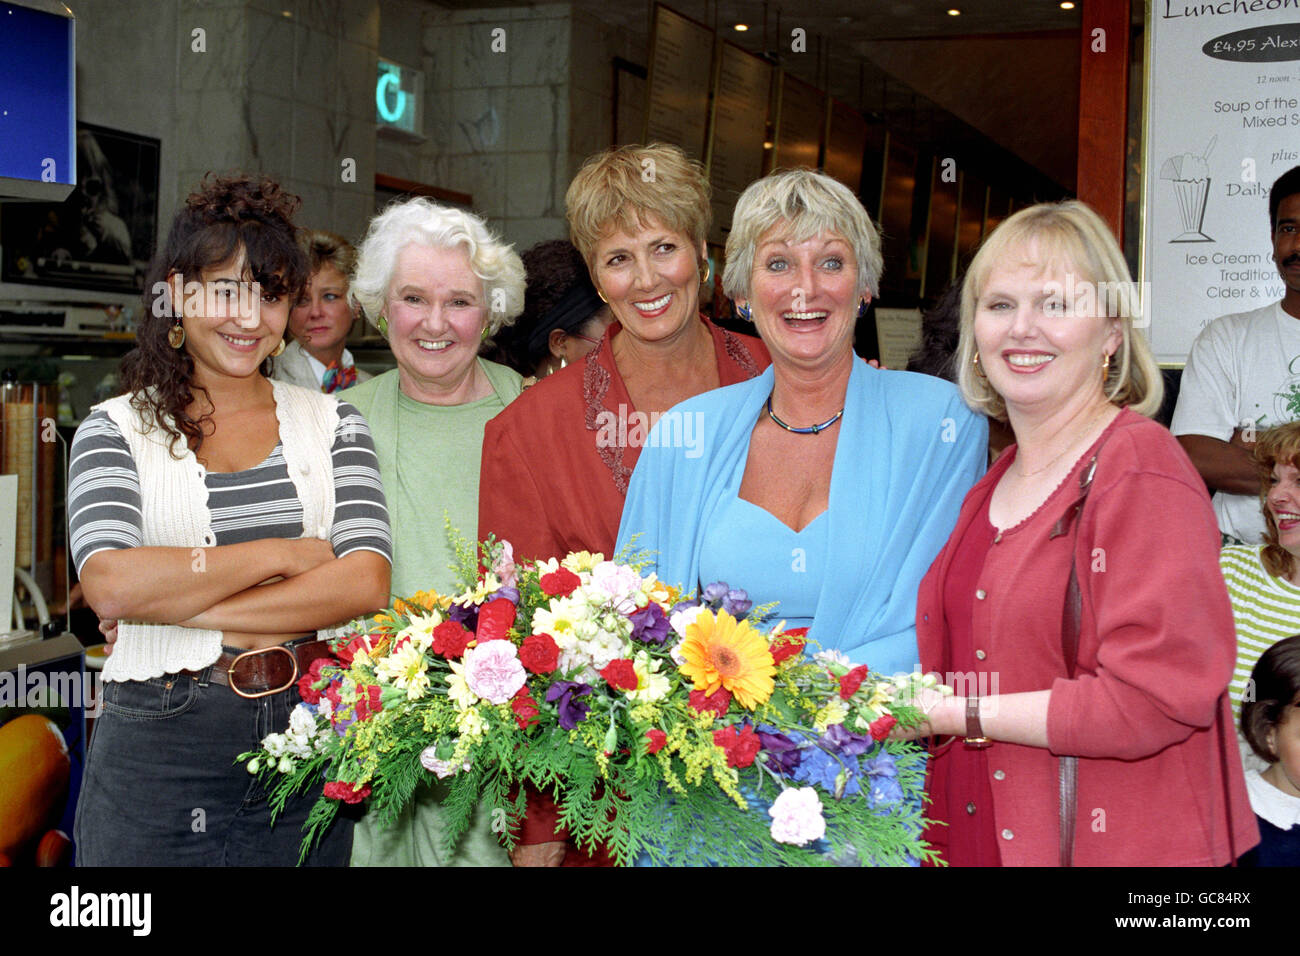 STARS OF THE AXED BBC SOAP ELDORADO IN LONDON AFTER THE FINAL EPISODE WAS SCREENED. L-R SANDRA SANDRI [PILAR], FAITH KENT [OLIVE], HILARY CRANE [ROSEMARY], POLLY PERKINS [TRISH] AND PATRICIA BRAKE [GWEN]. Stock Photo